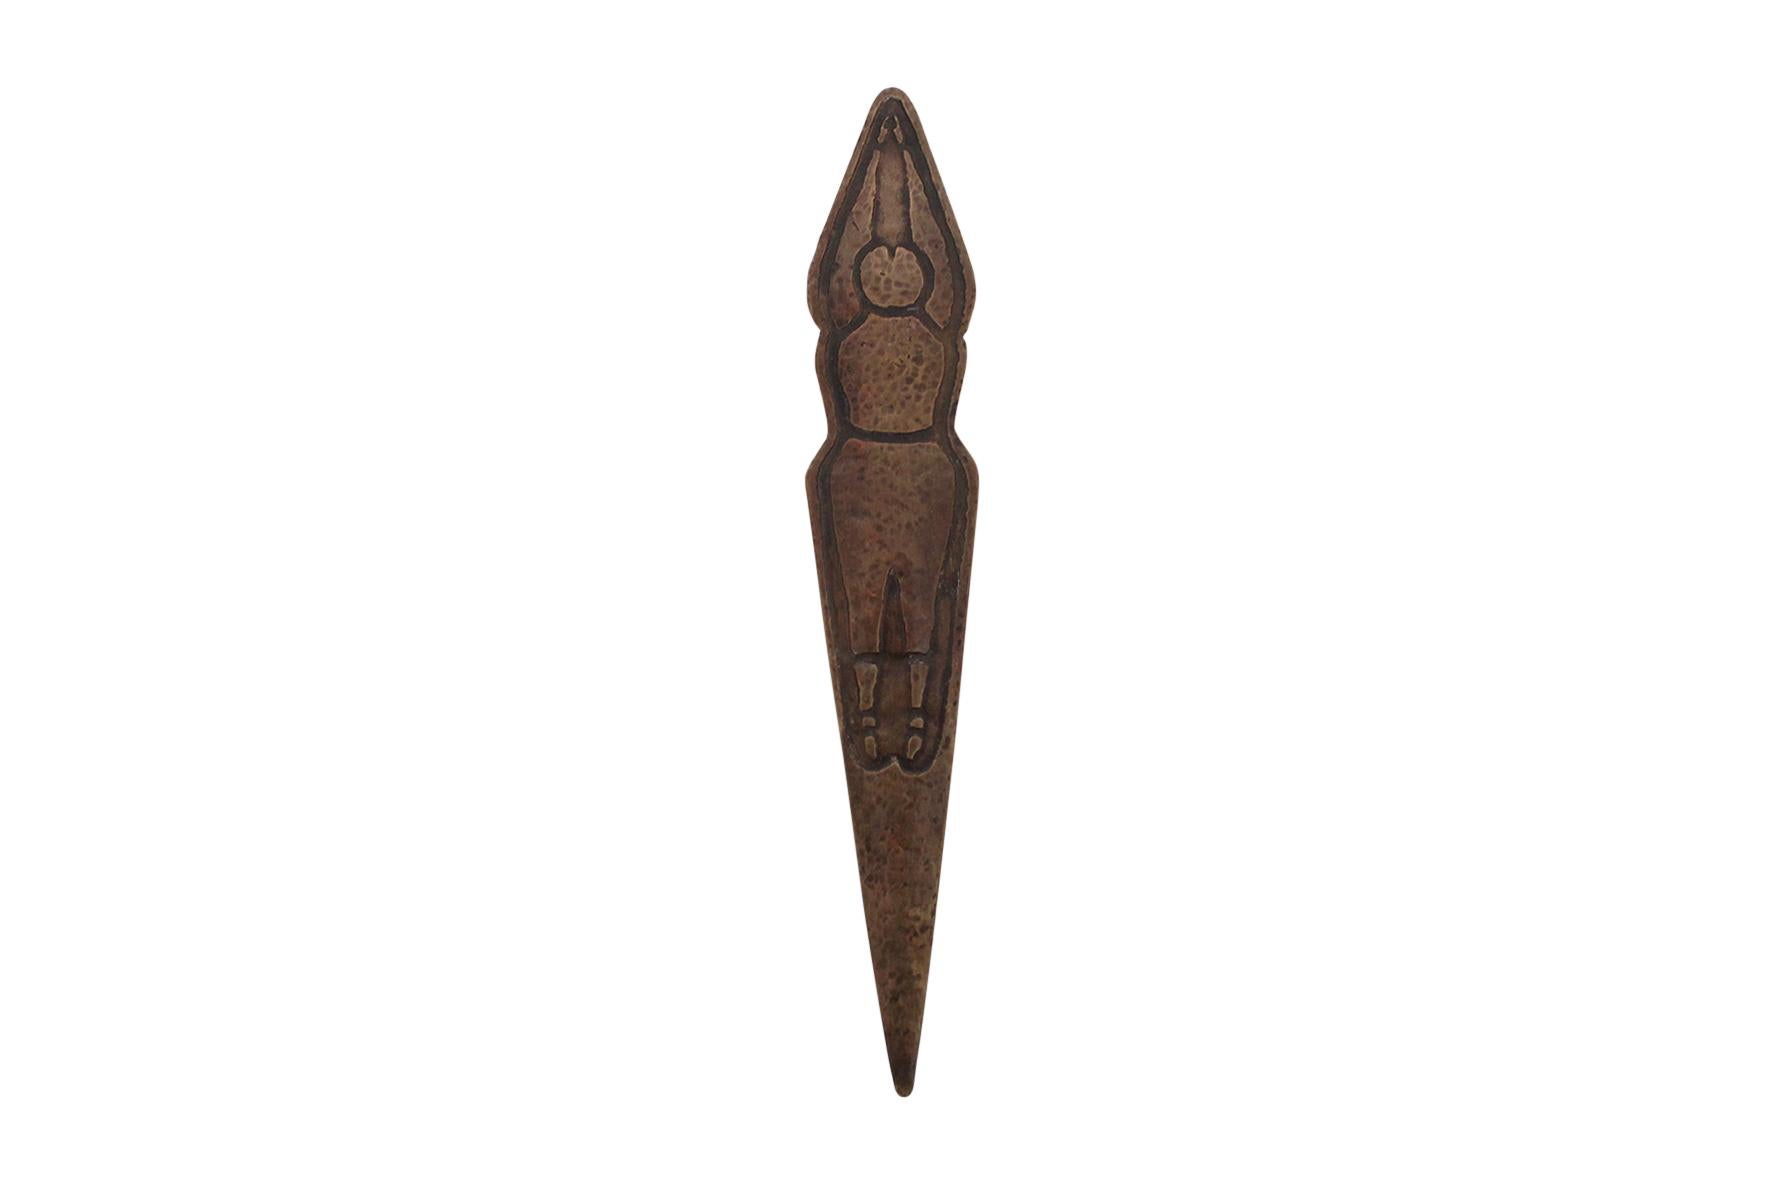 Thirties Arts & Crafts era hammered copper letter opener with a stylized swimmer in relief by Forest Craft Guild. The Guild was known for its artful and light hearted design motifs on expertly crafted objects.

____

We're offering our customers